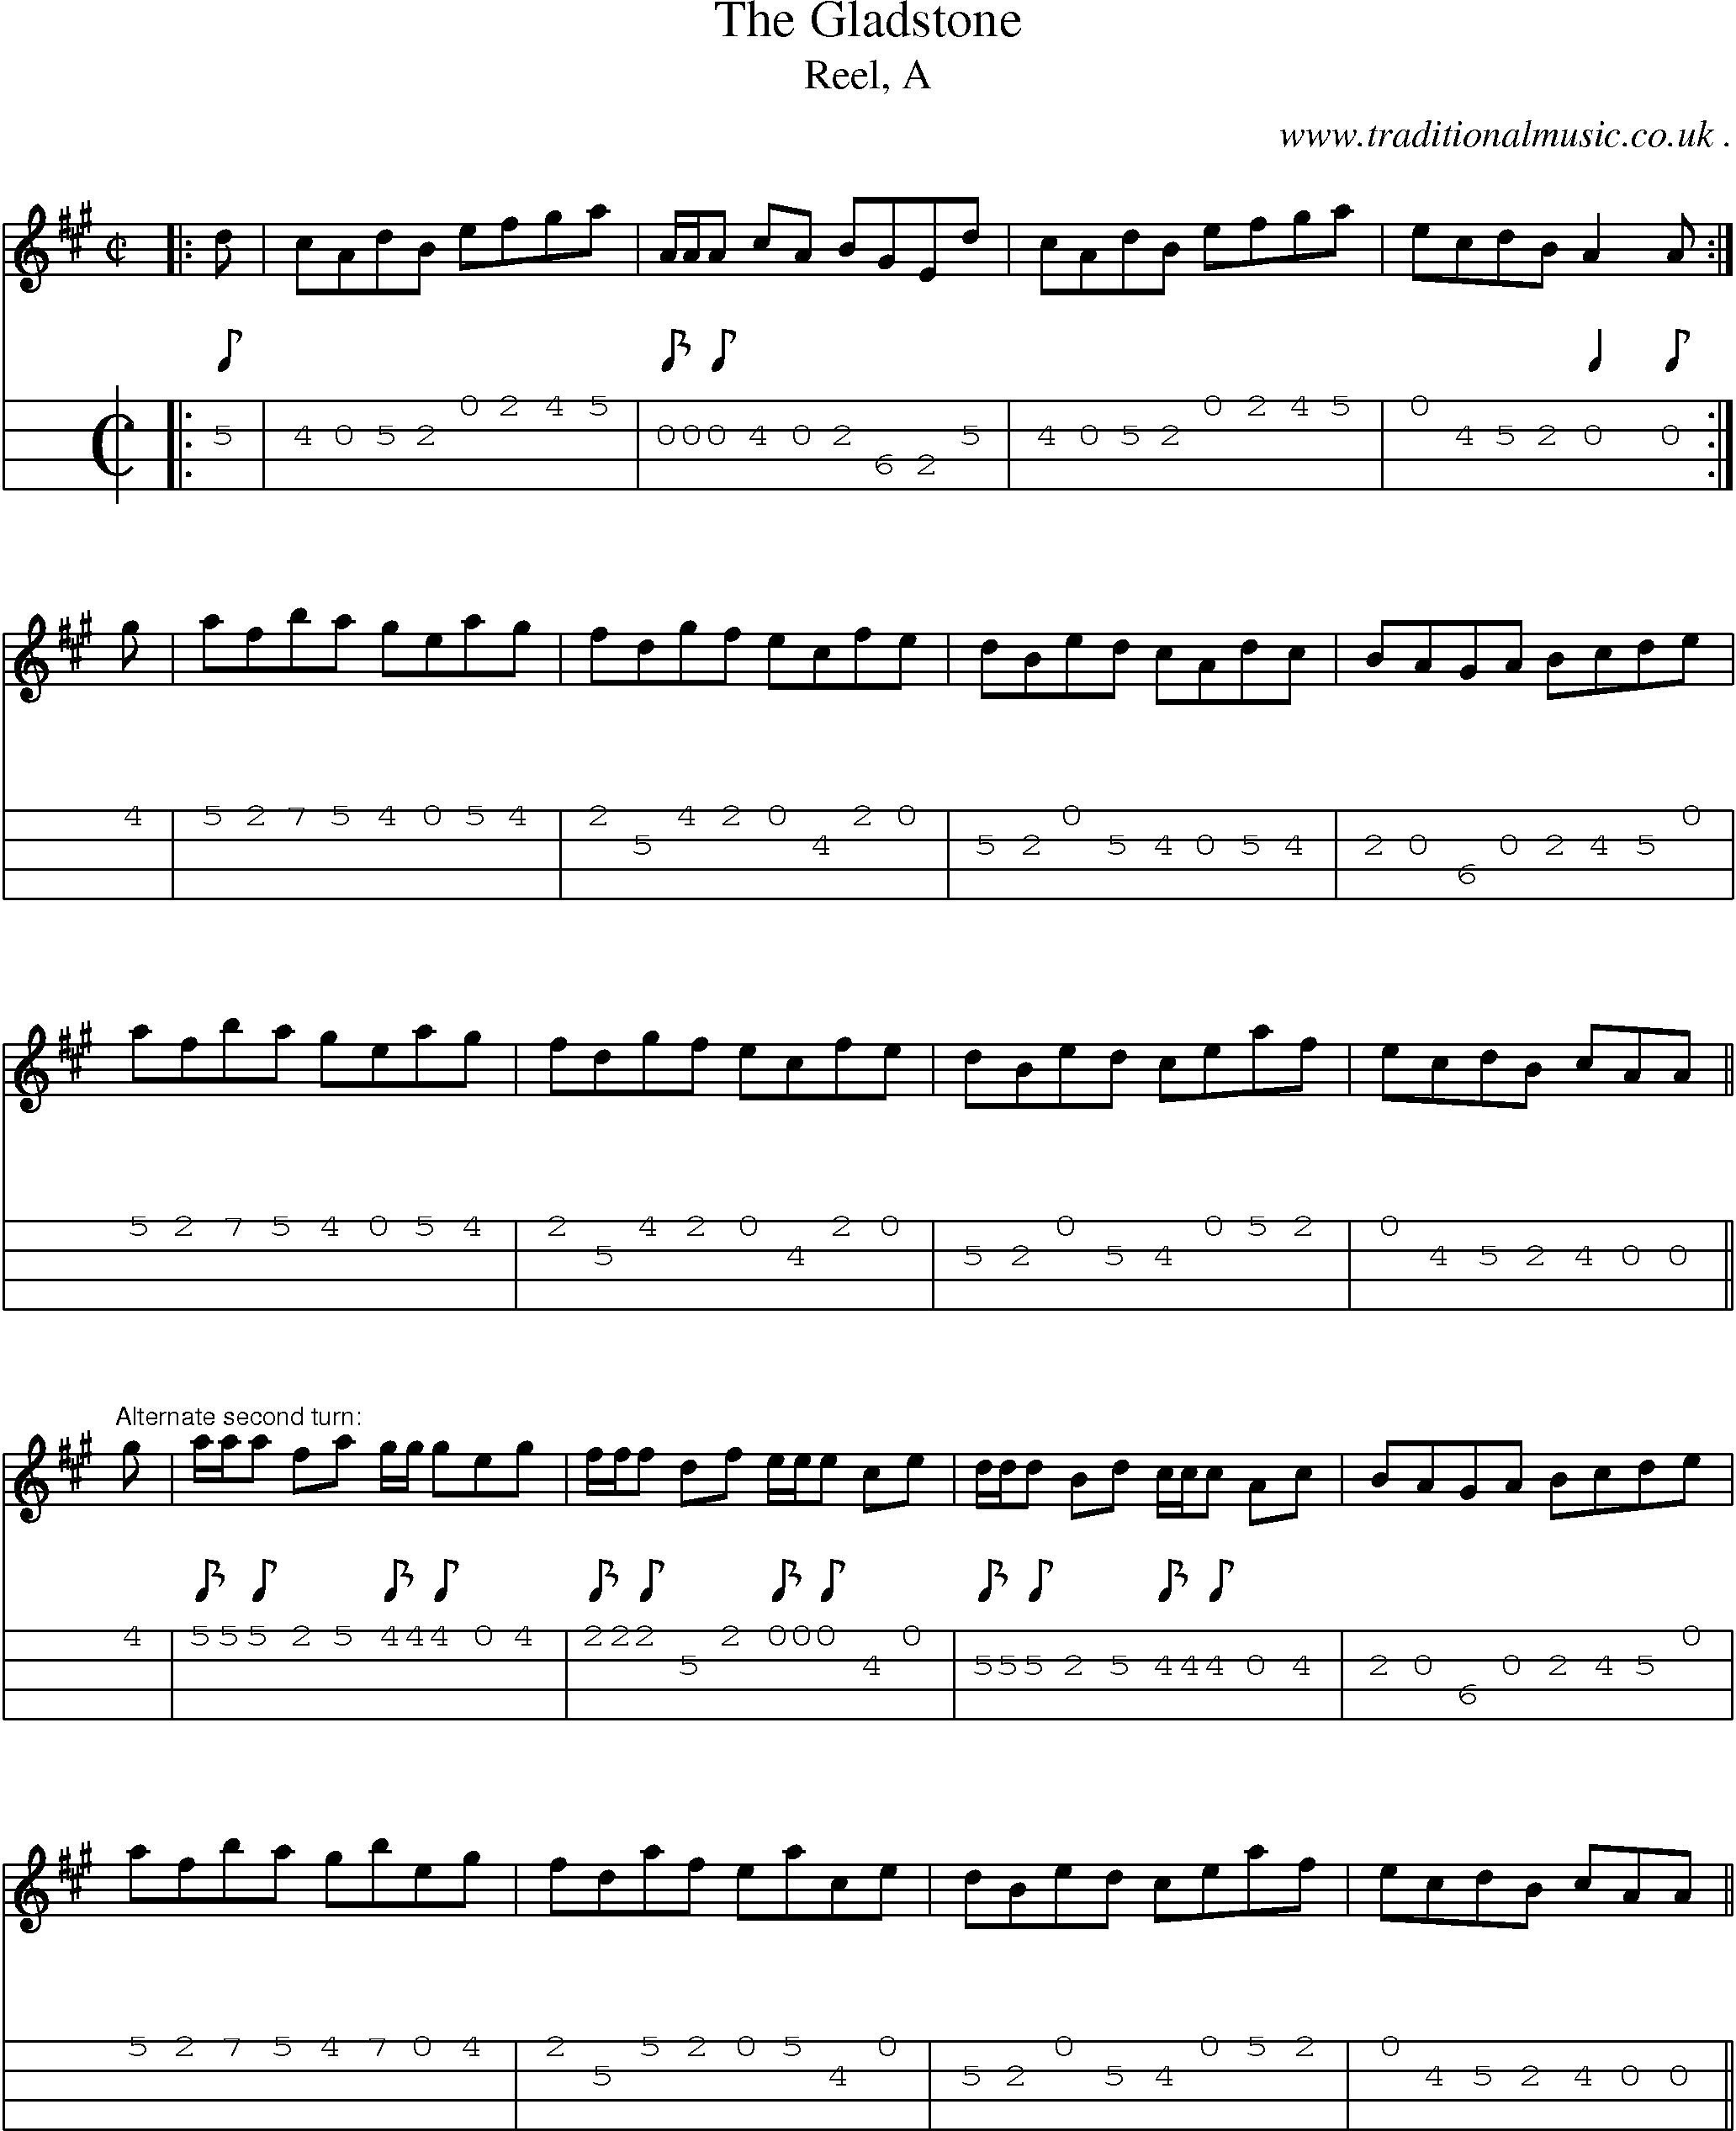 Sheet-music  score, Chords and Mandolin Tabs for The Gladstone